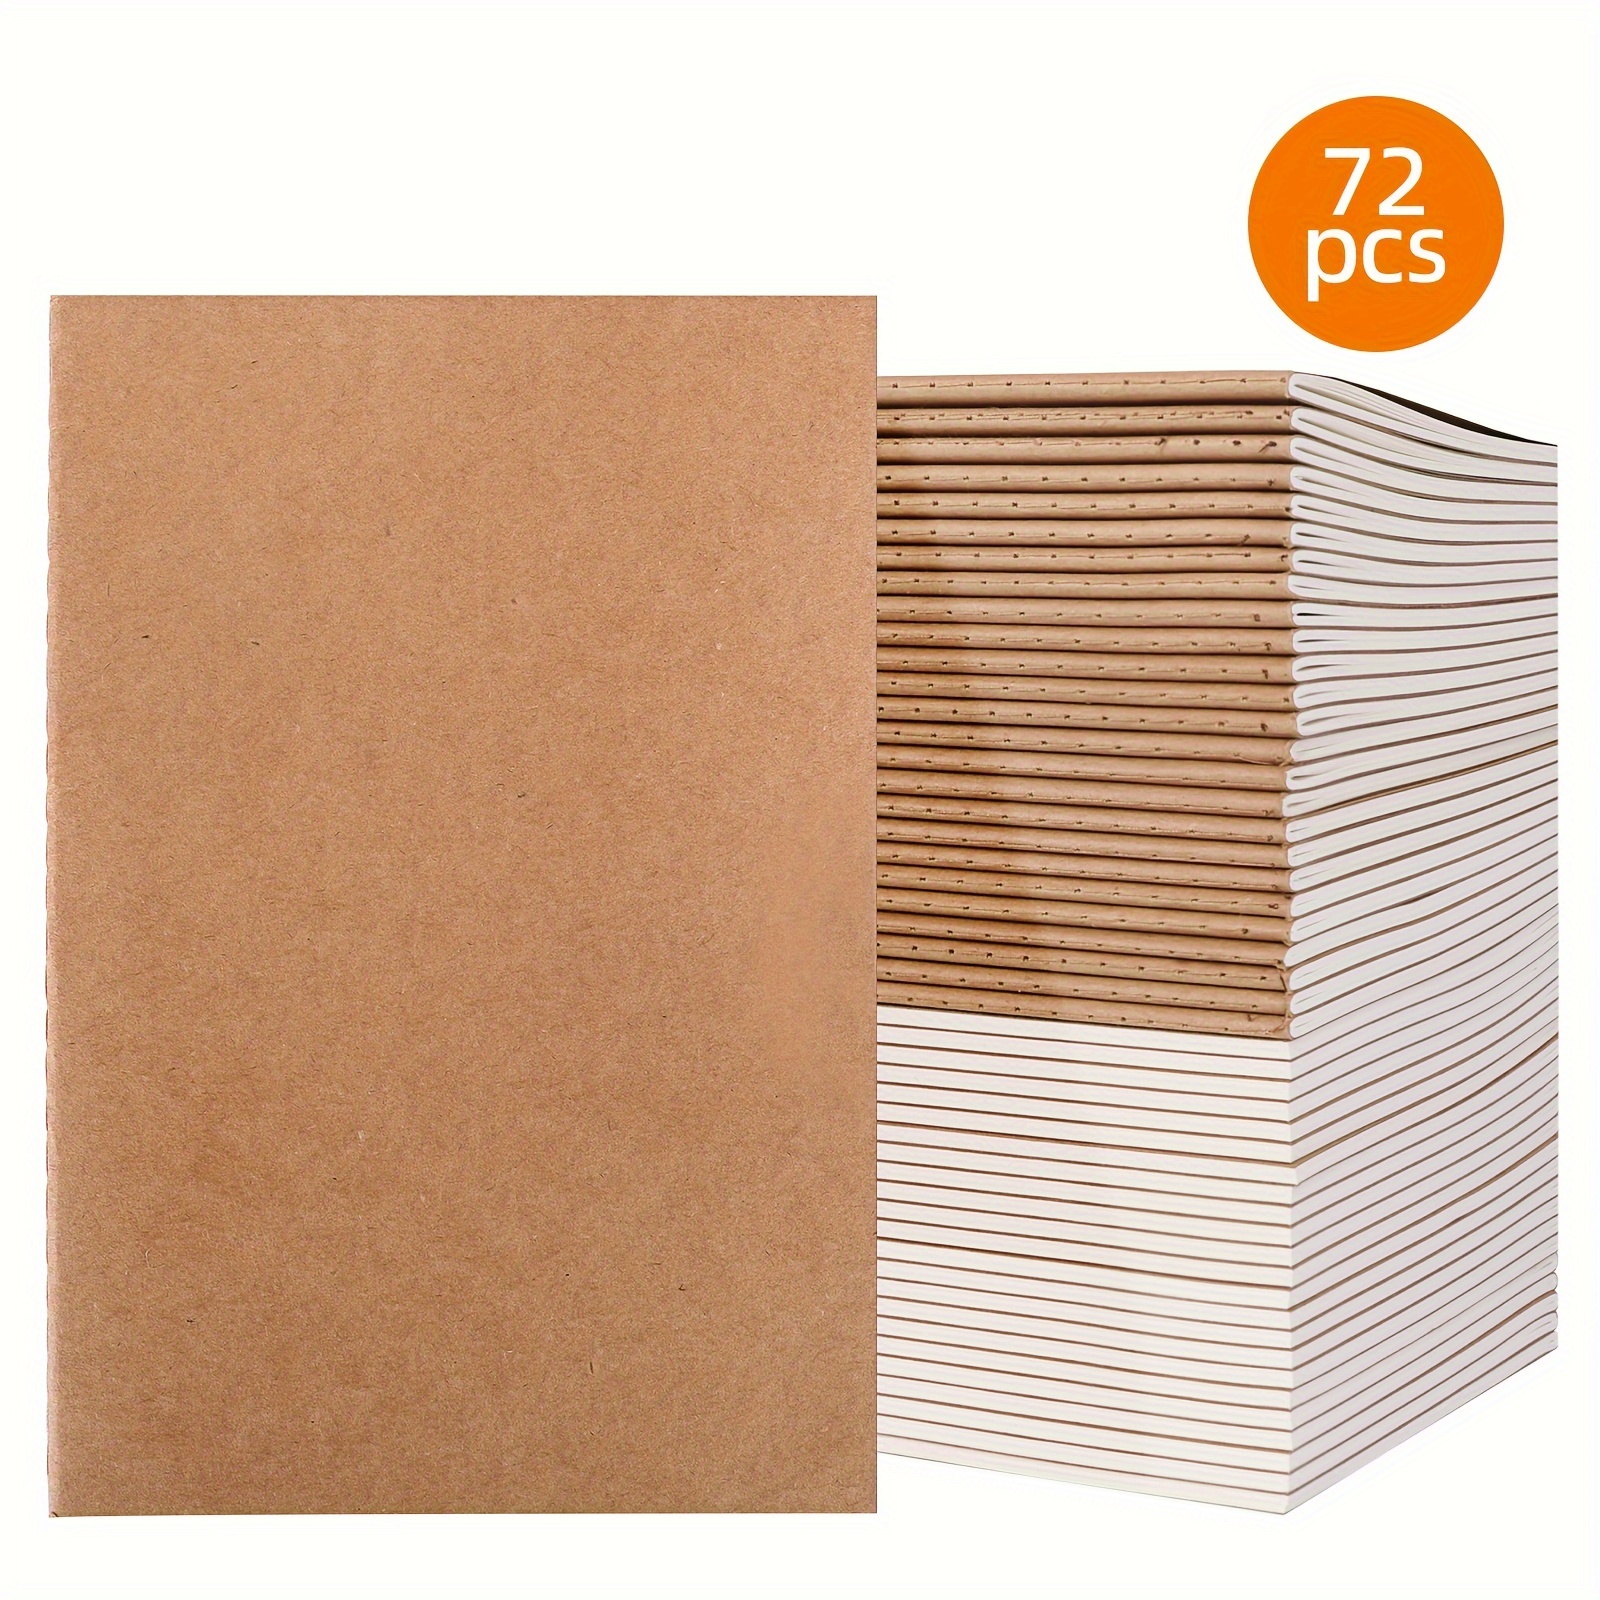 

72 Pack Kraft Notebooks, Journals In Bulk For Writing, Blank Paper Sketchbooks, 60 Pages Composition Notebook, A5 Size, Travel Journal Set, For Gifts, Students And Office Supplies, 8.3x5.5 In